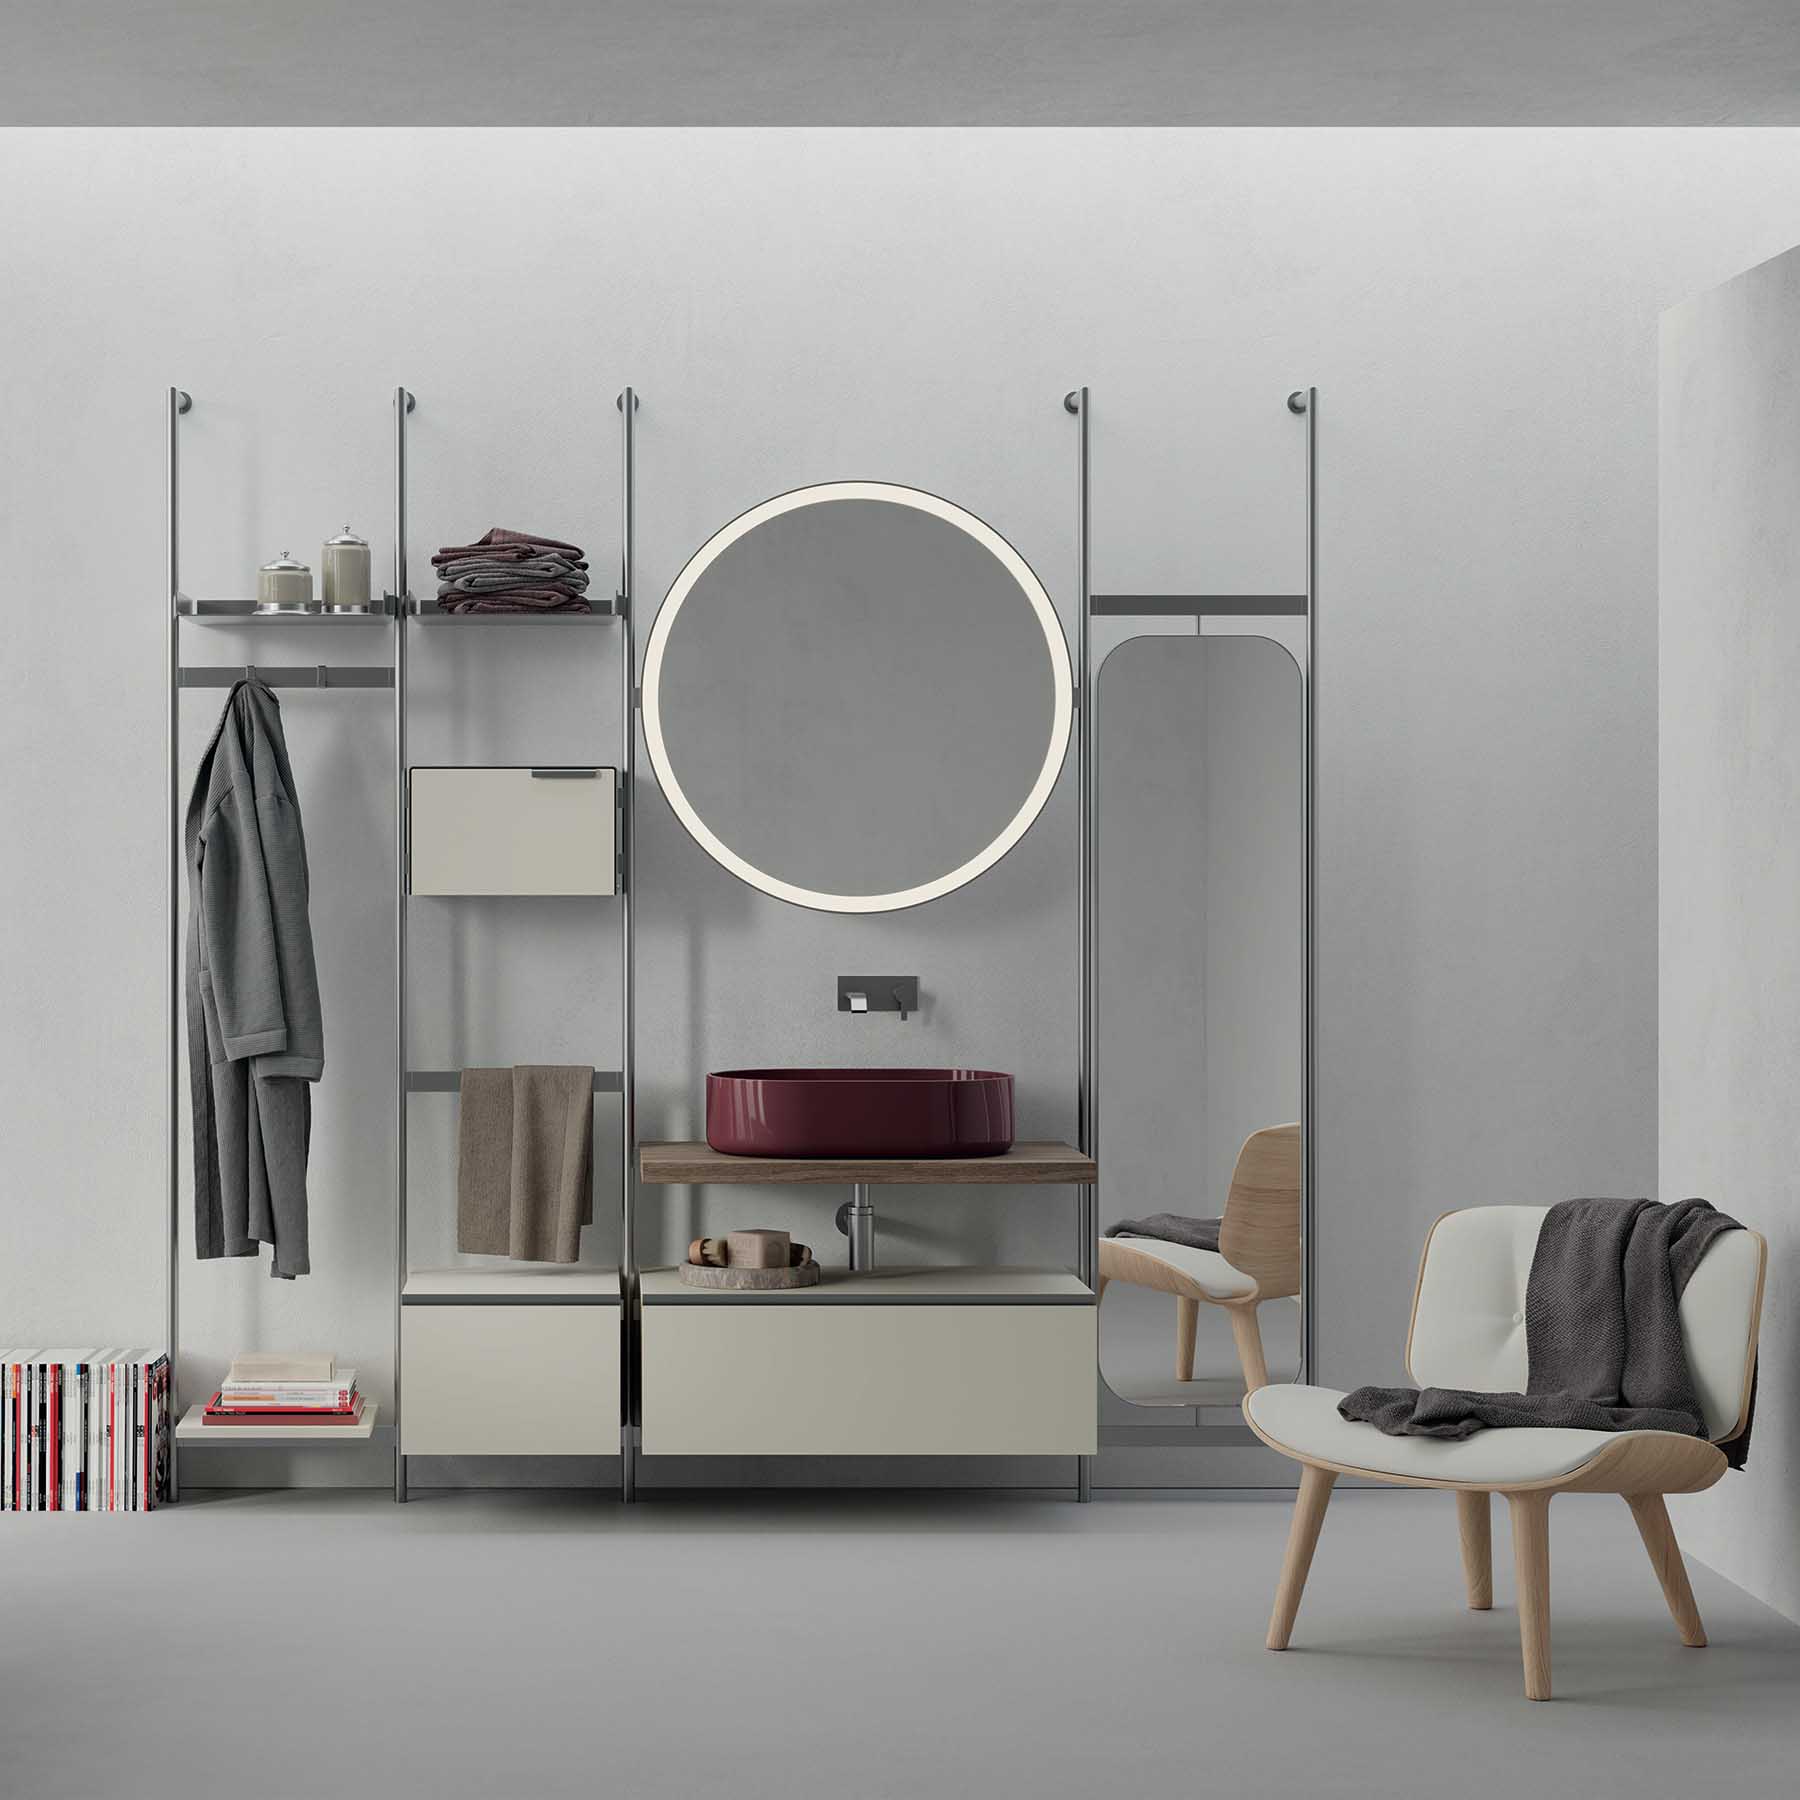 Over Modular System Furniture by Nic Srl and Studio 63